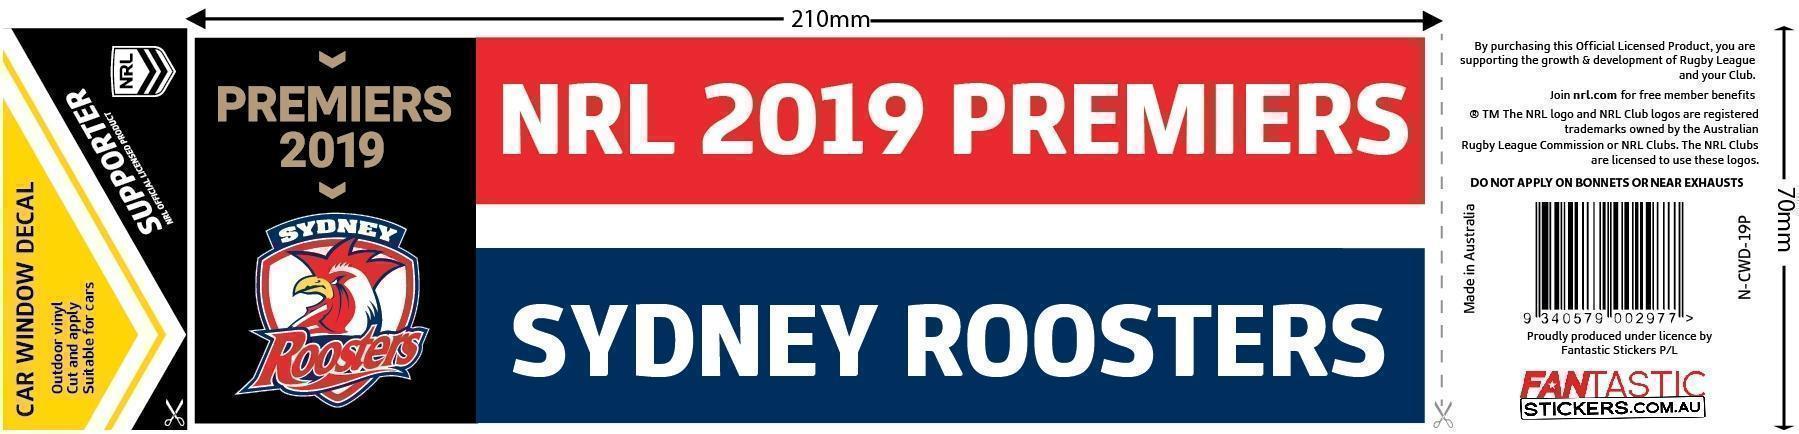 Sydney Roosters 2019 Premiers Car Window Decal